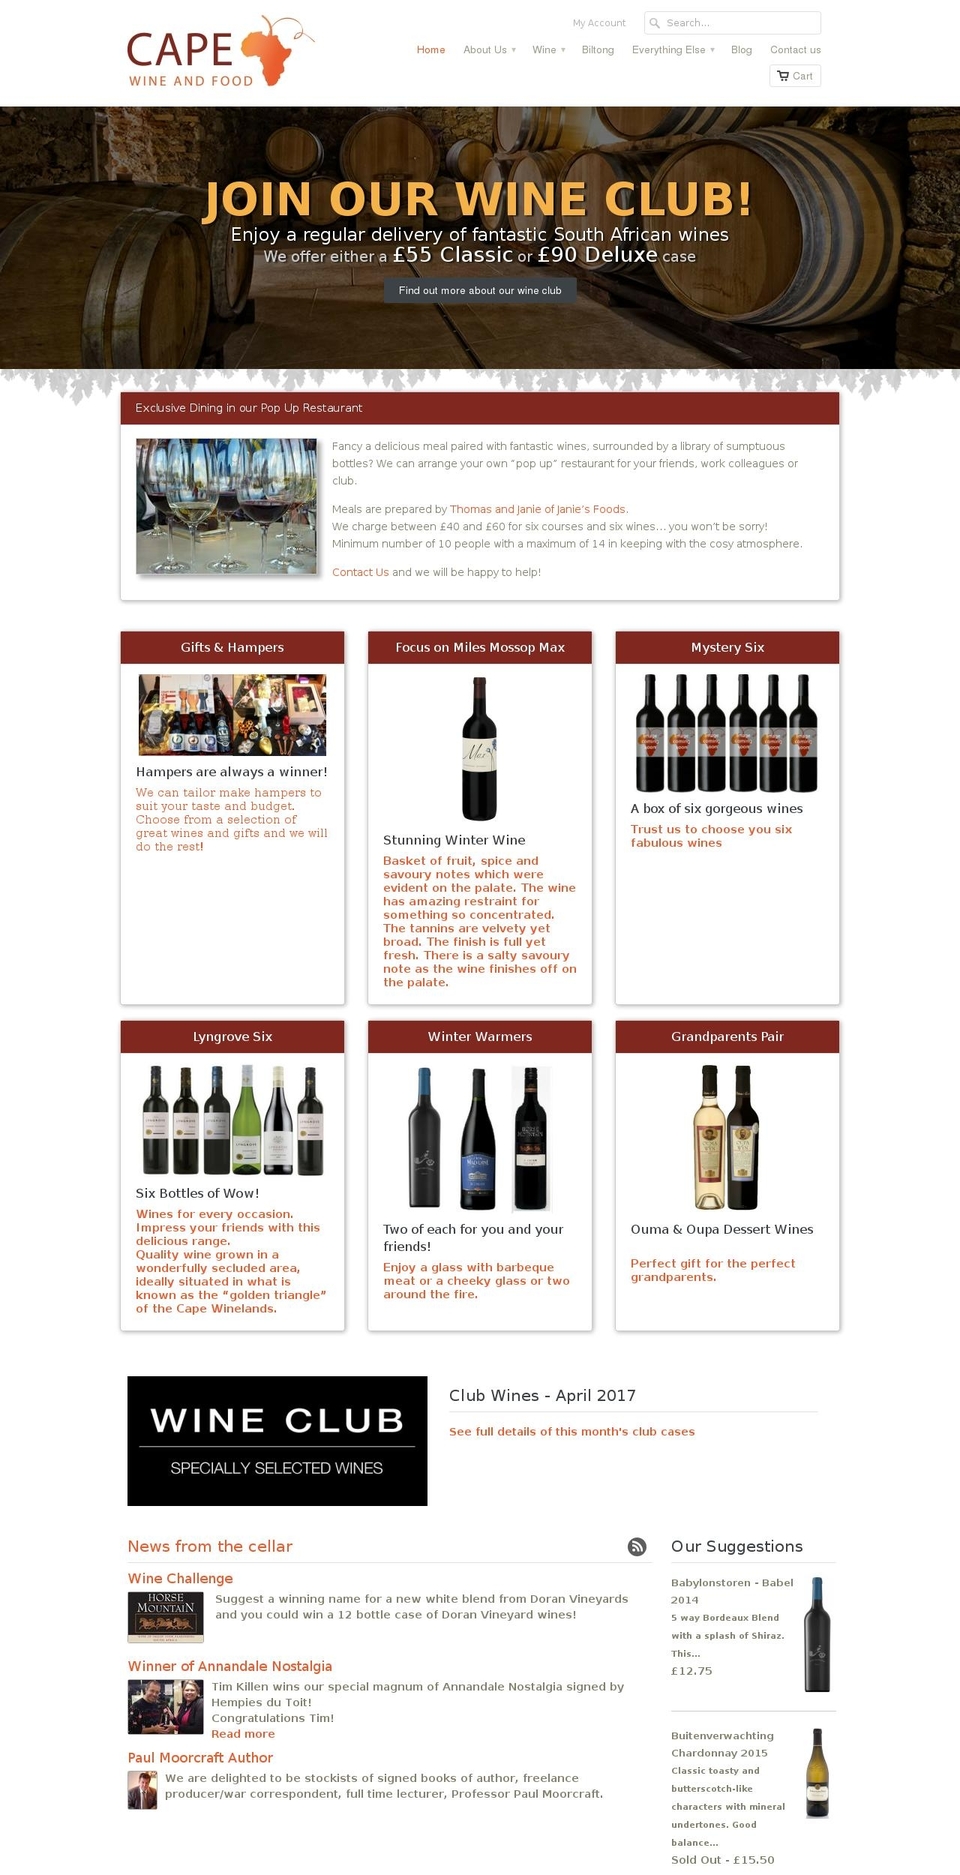 Live Site Shopify theme site example capewineandfood.com